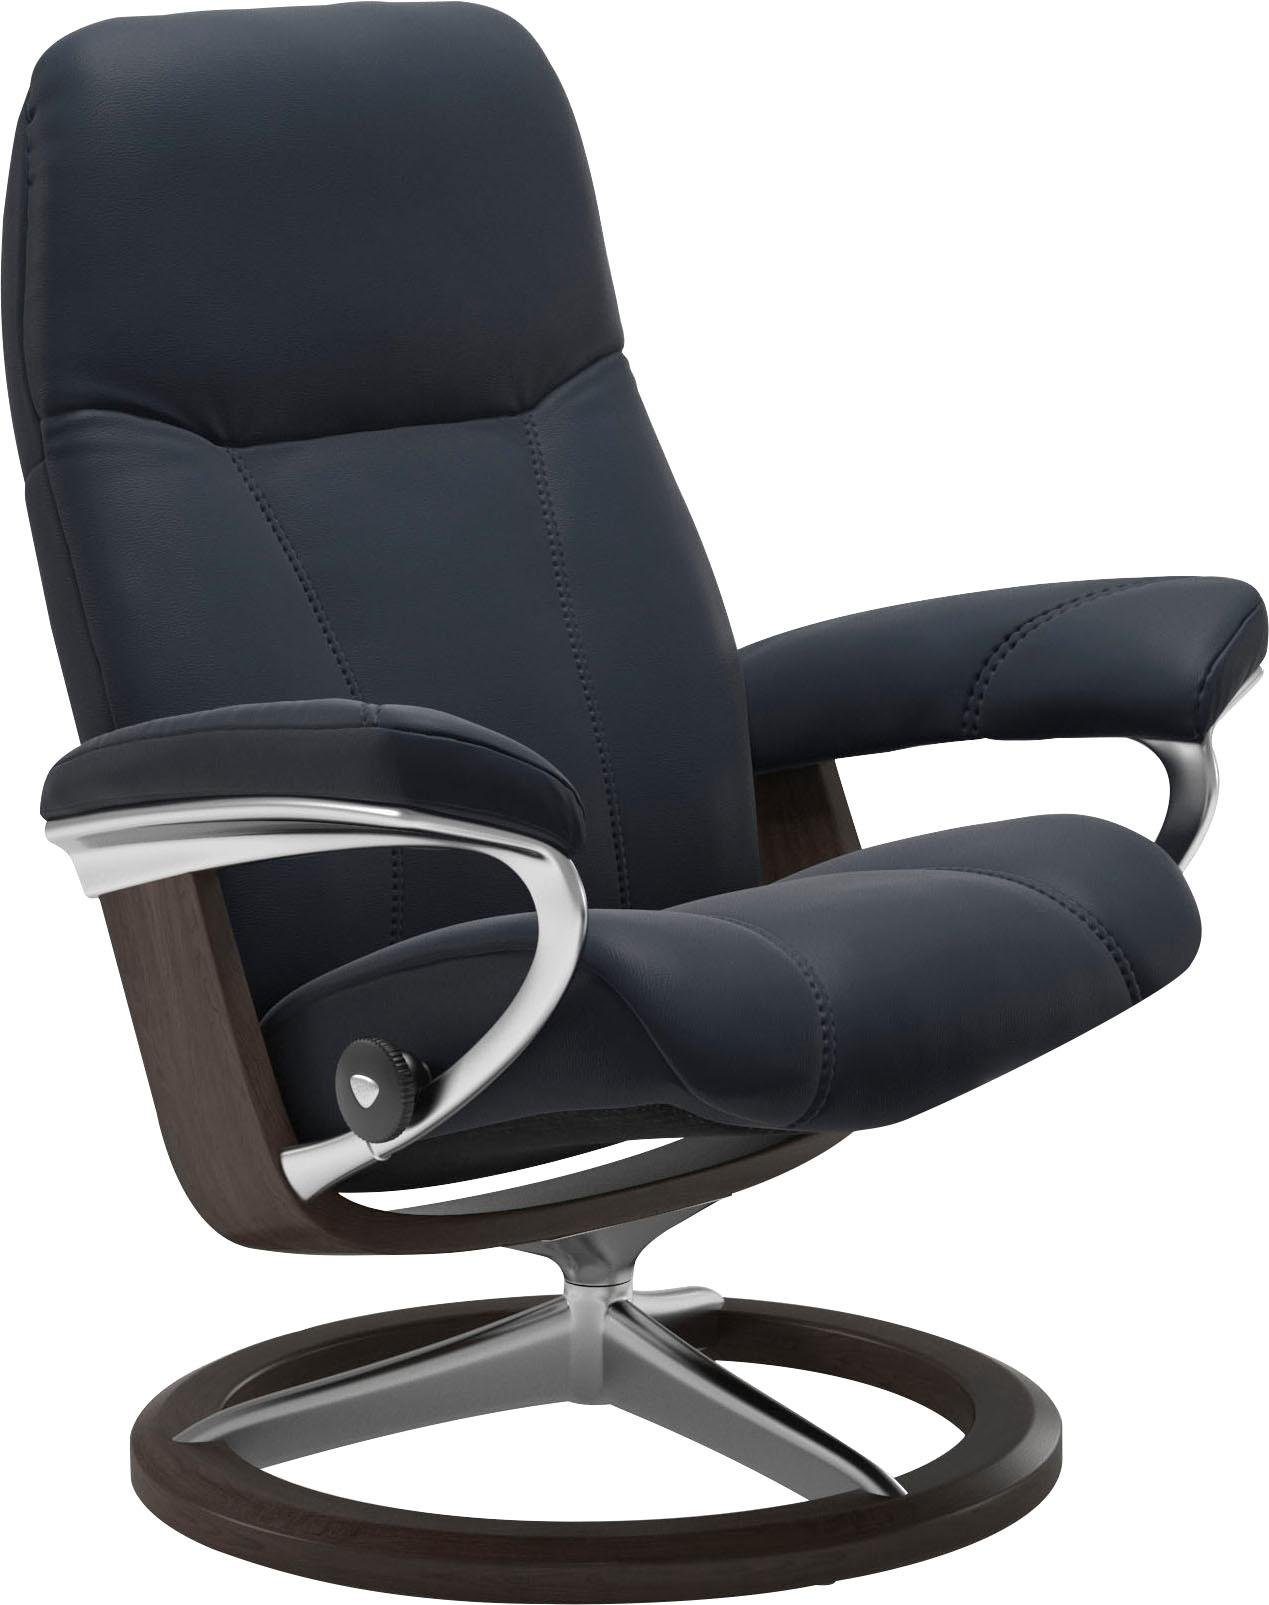 Stressless® Relaxsessel Consul, mit Größe Gestell Signature S, Base, Wenge